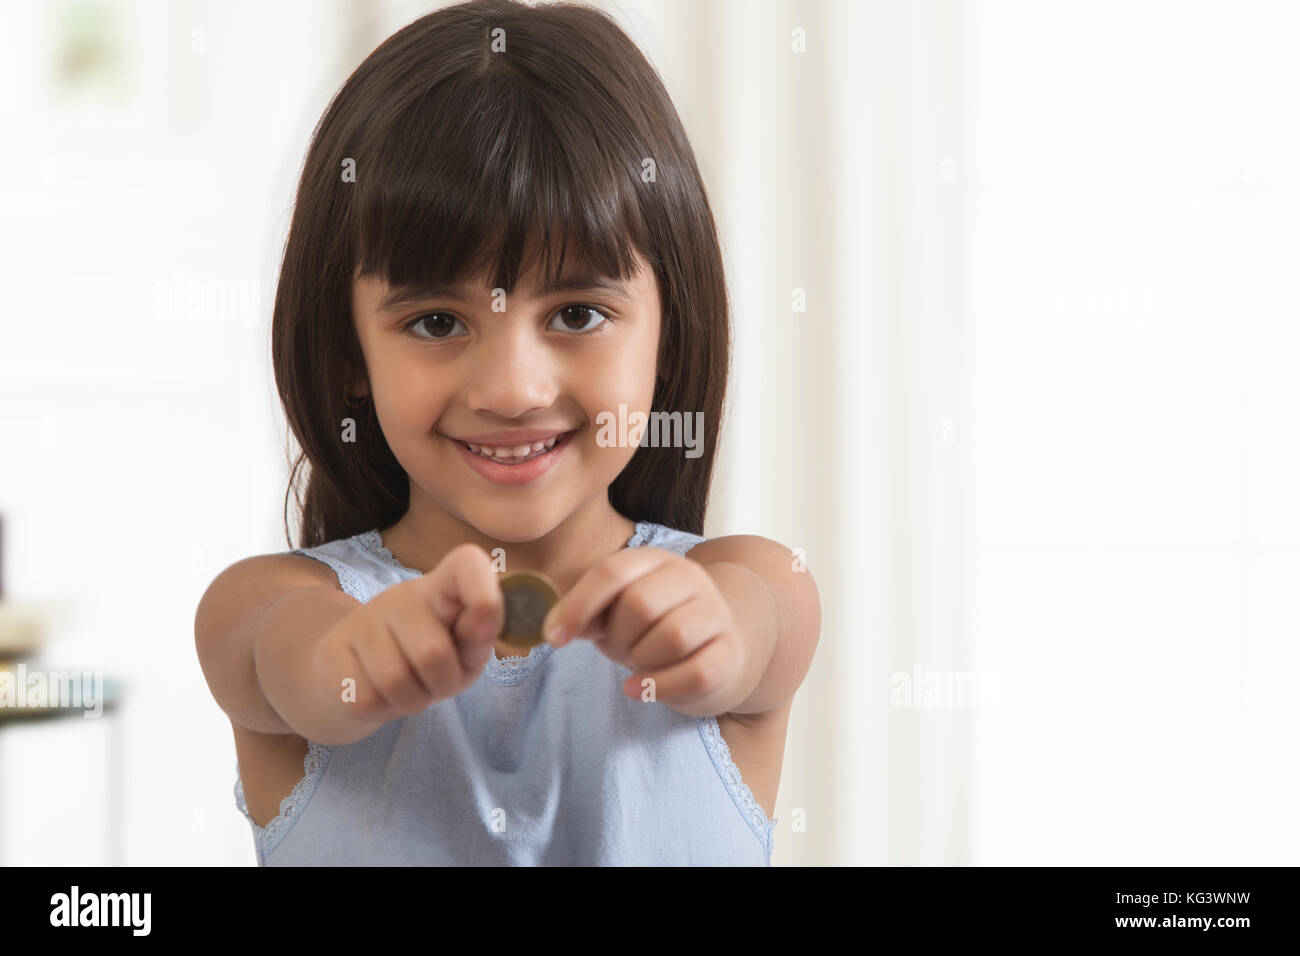 Smiling girl holding coin Banque D'Images